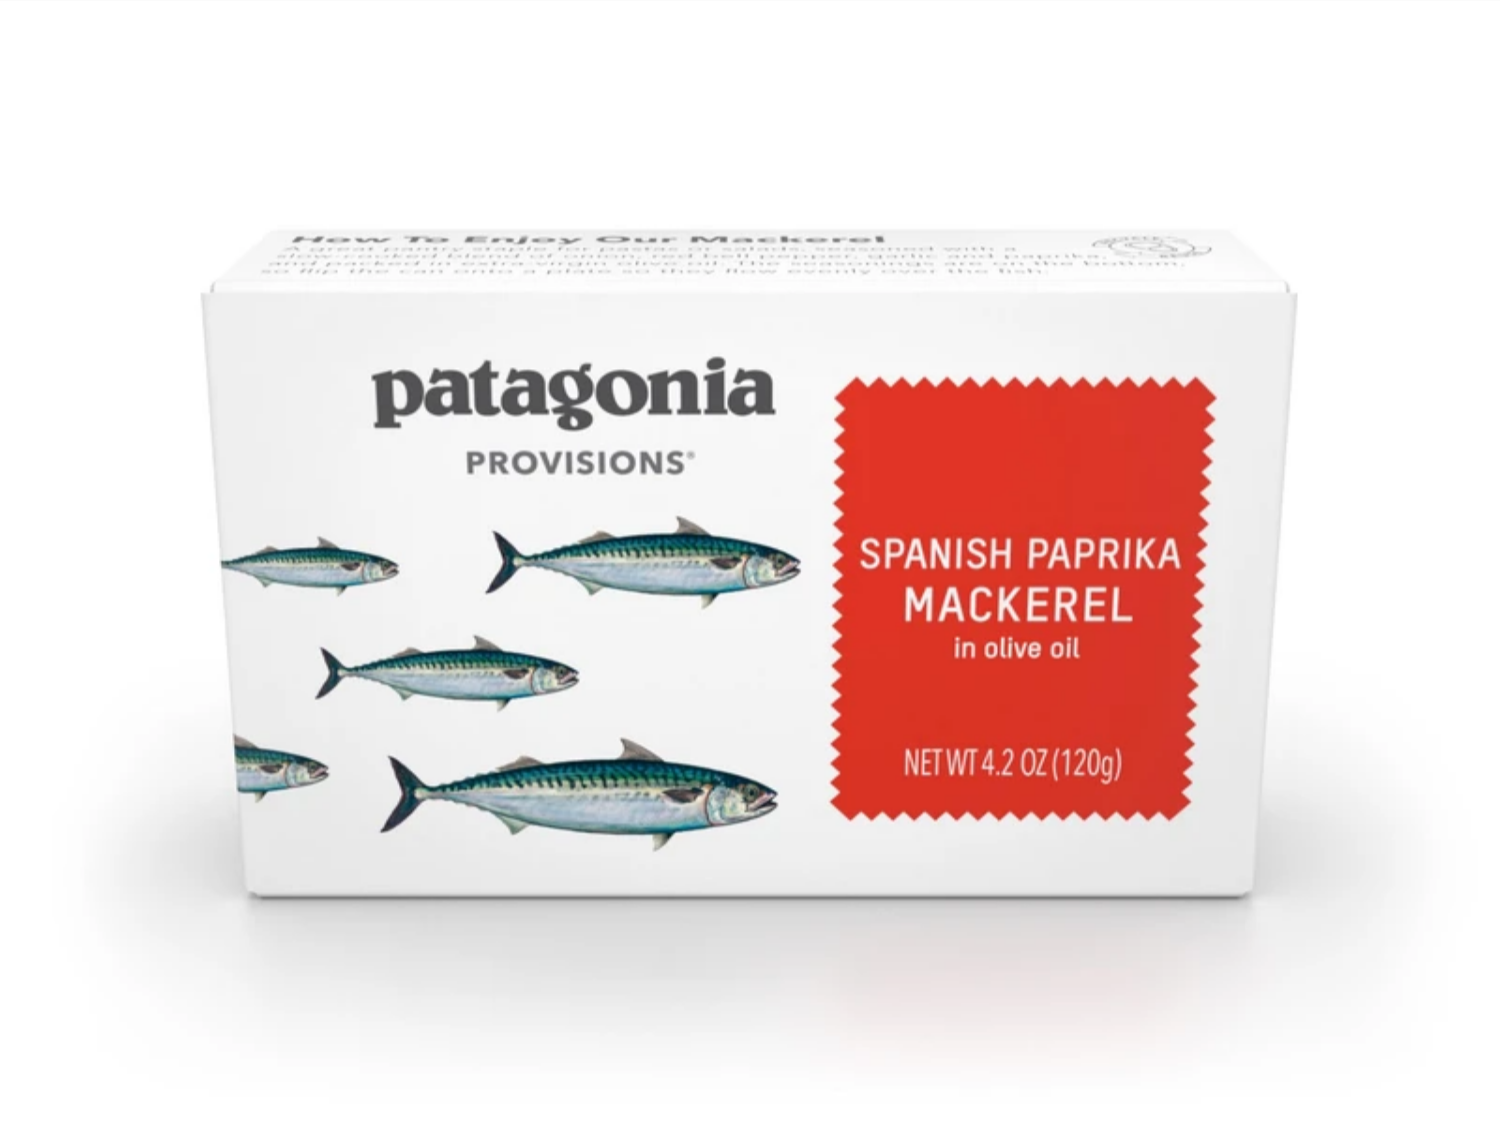 Patagonia Provisions - Mackerel (Assorted Flavors) - 4.2 oz. Can Spanish Paprika - Harney & Sons Fine Teas